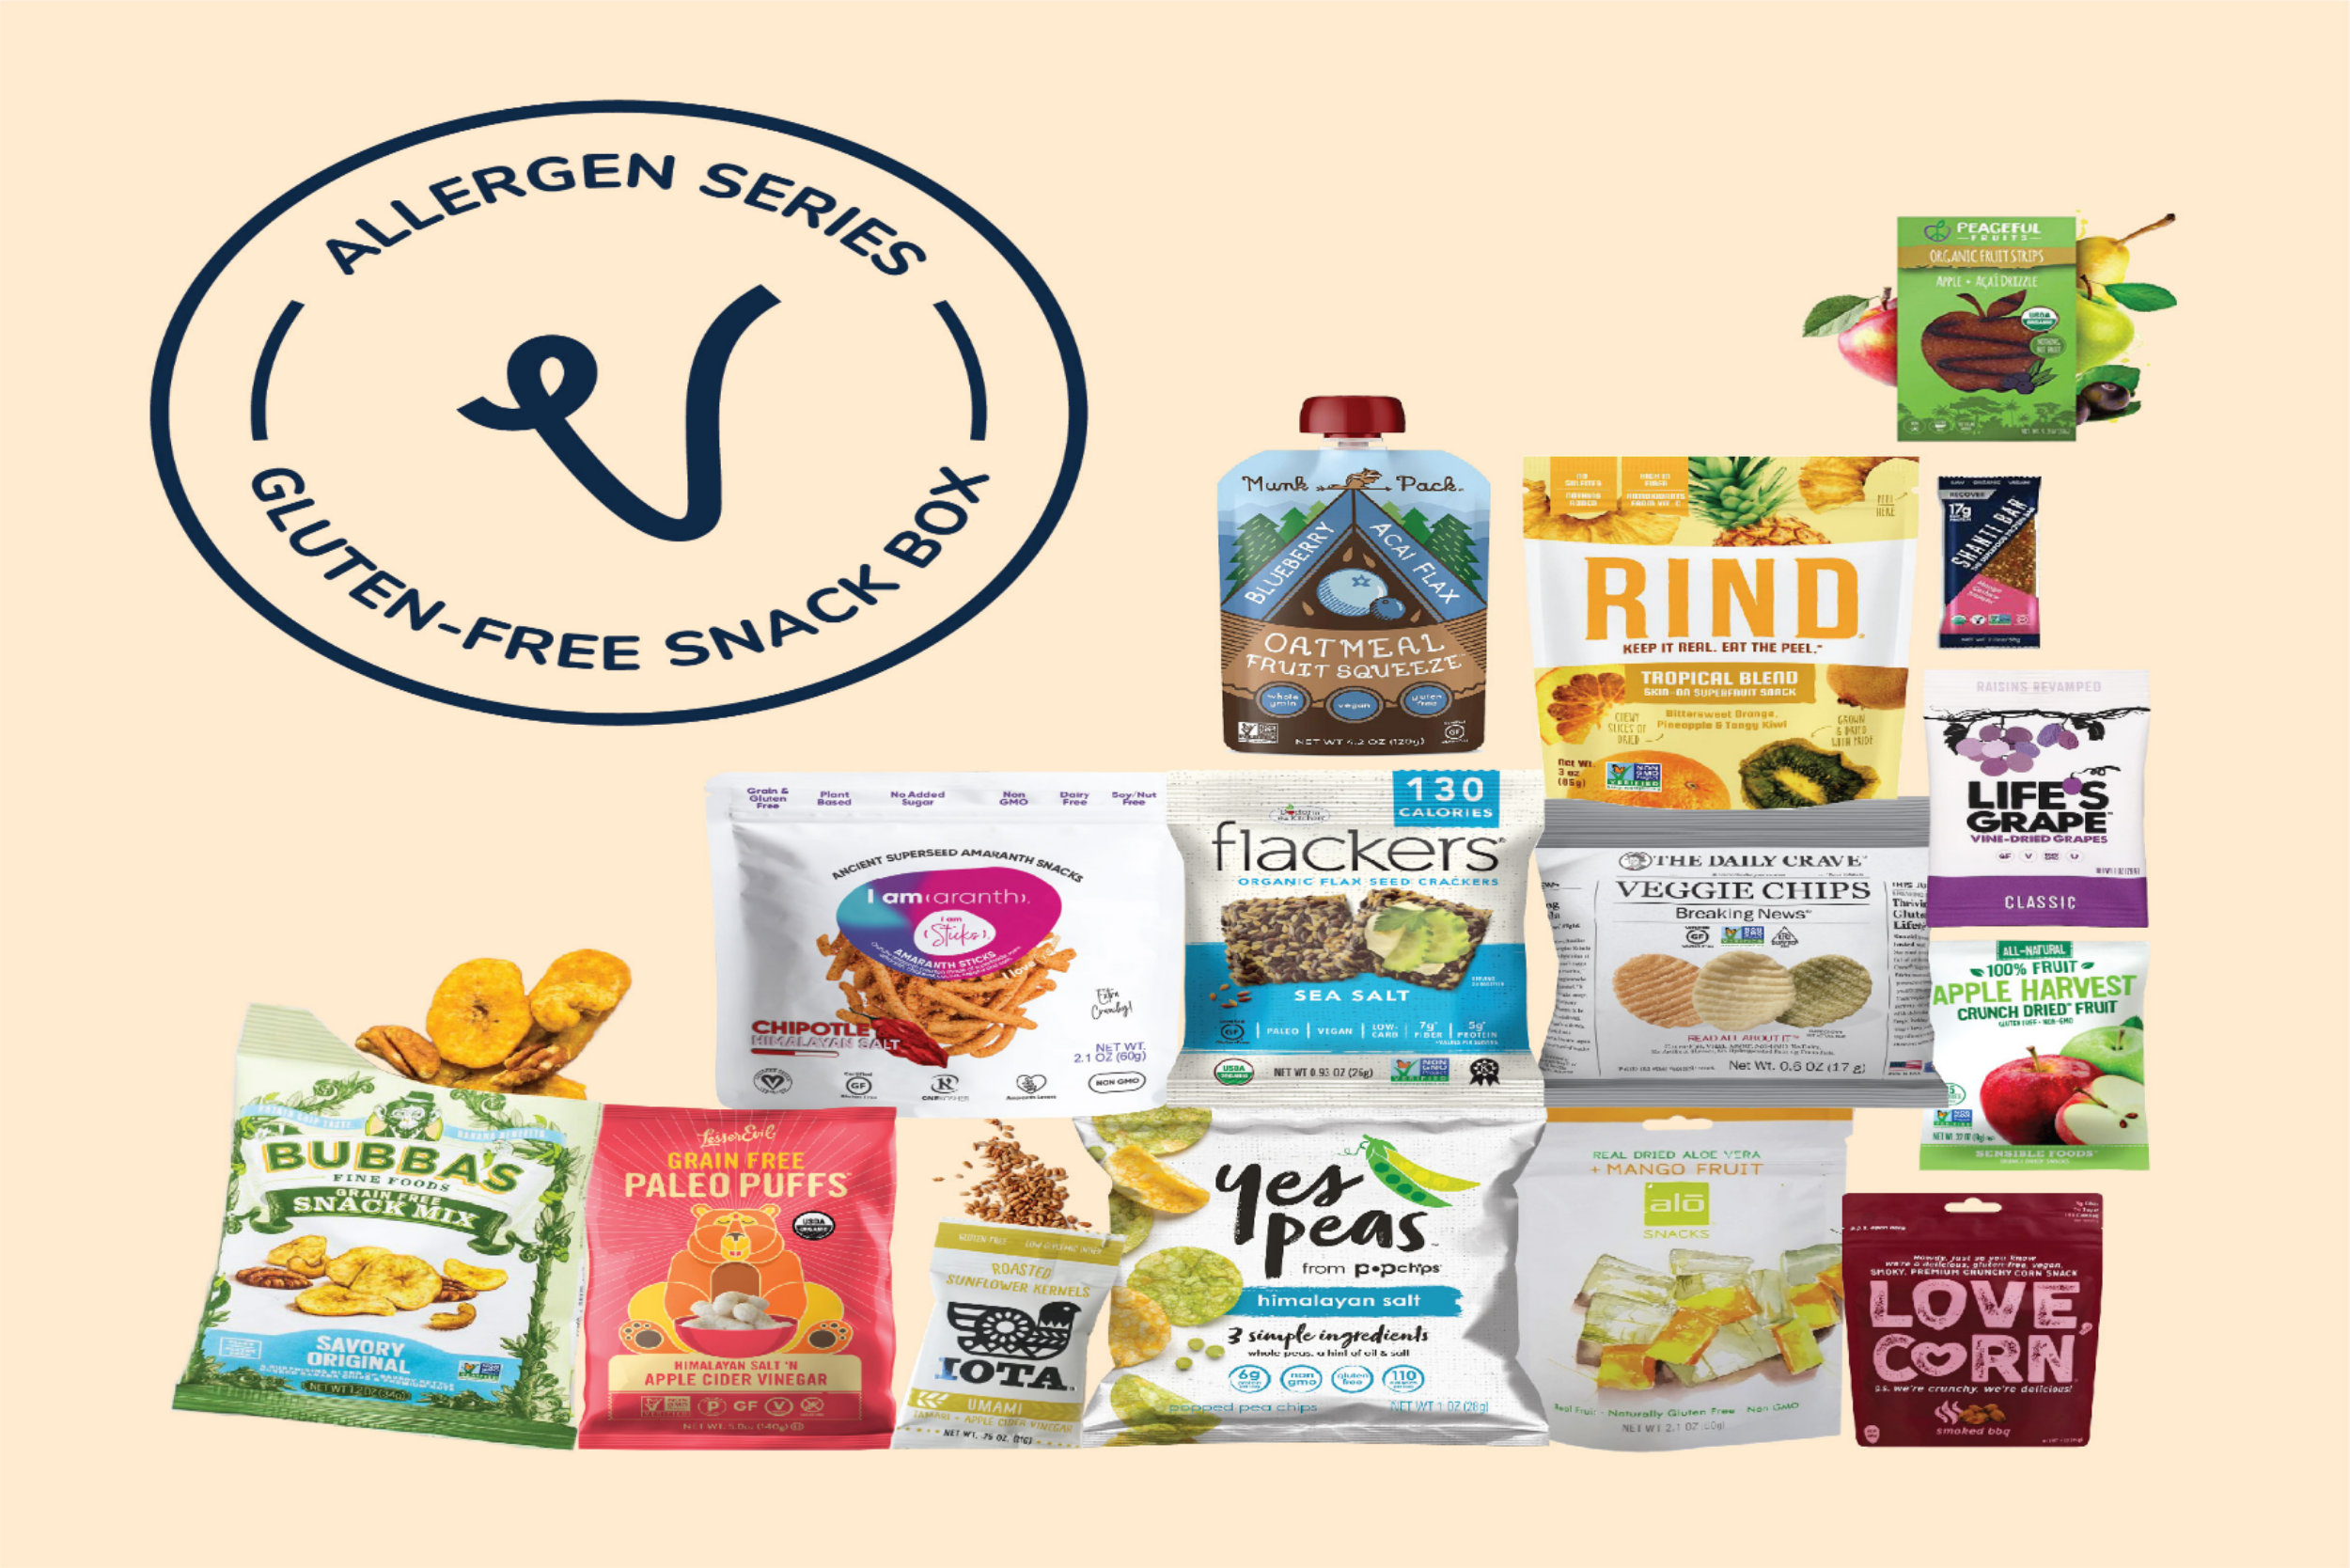 Day 2 of 12 Days of Sales: Gluten-Free Snack Box